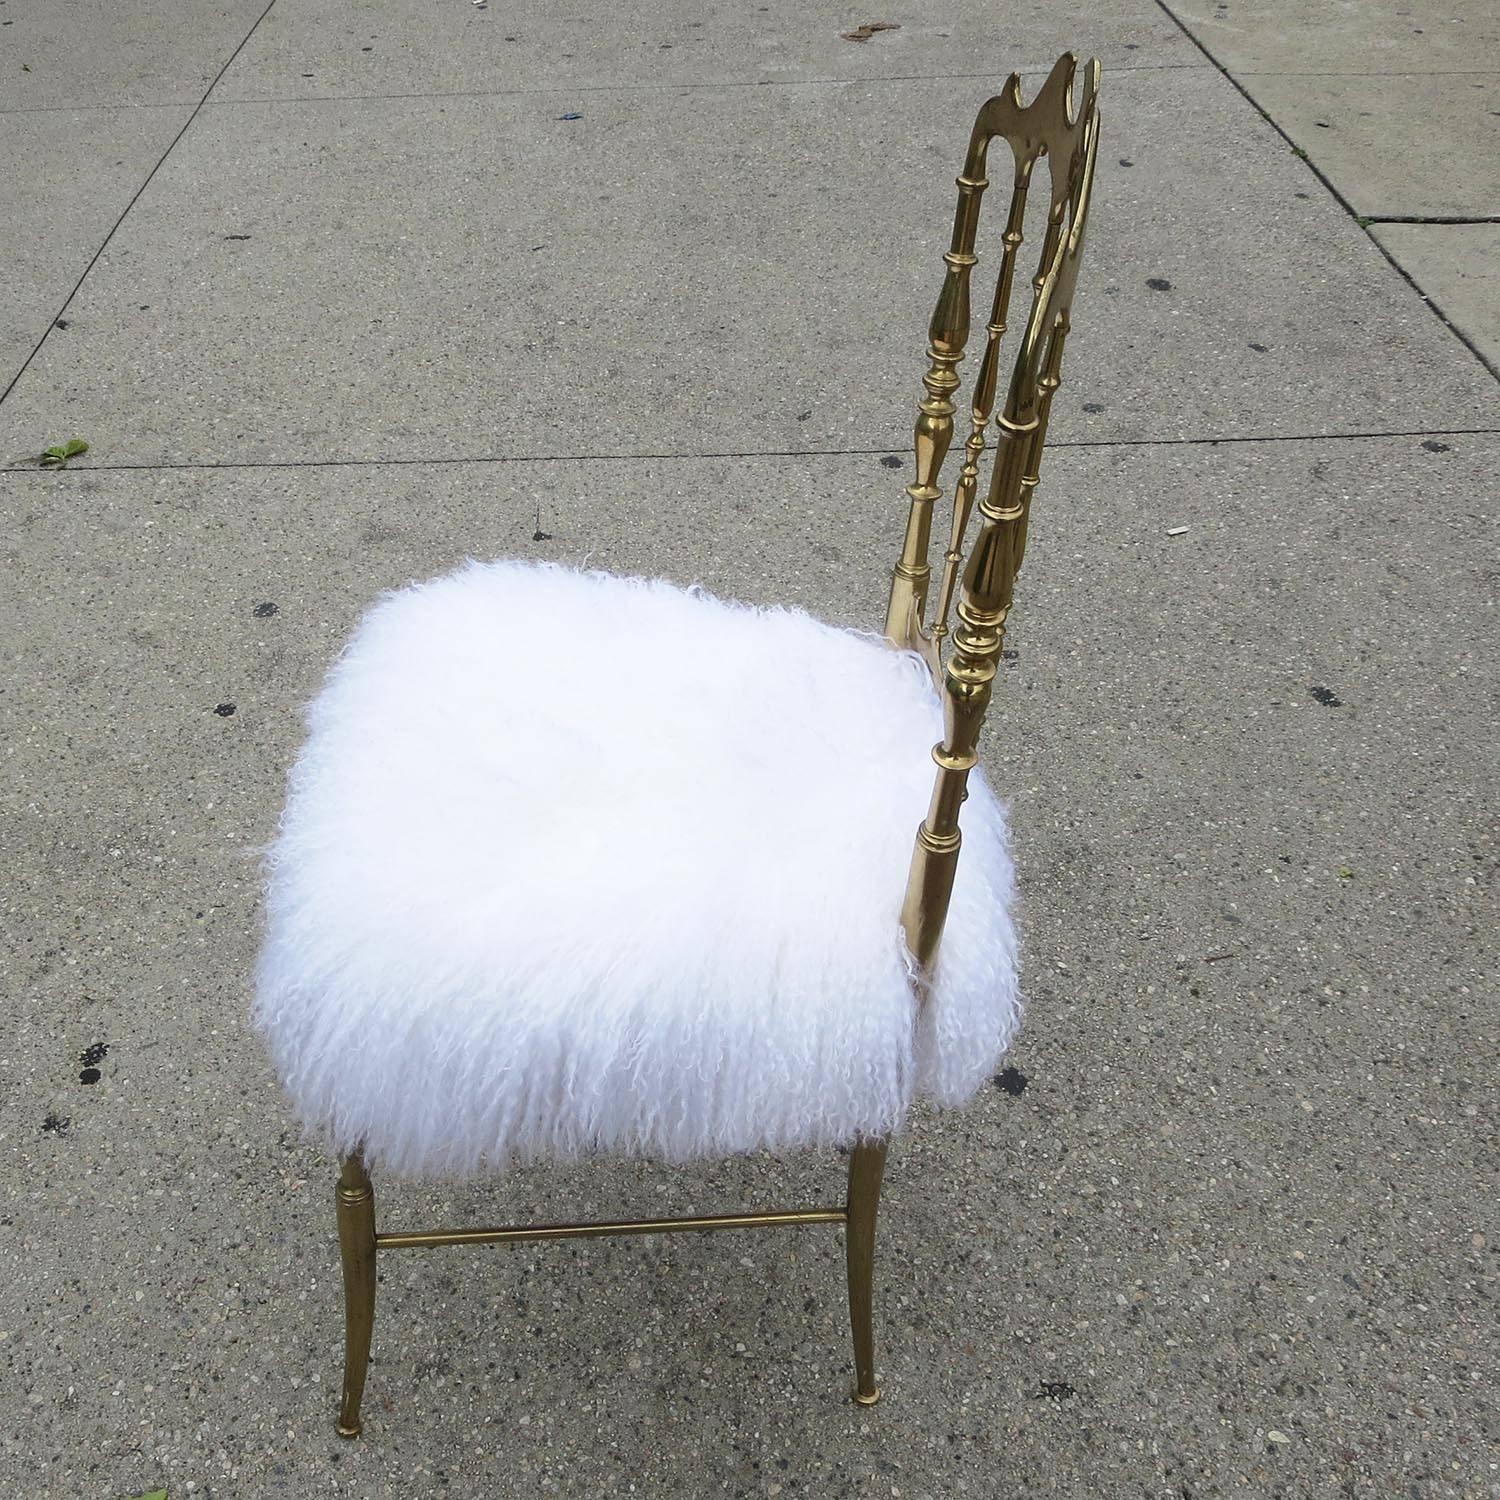 This lovely brass chair was made by Chiavari of Italy in the 1970s. We have just covered the seat in a new soft silky fur.